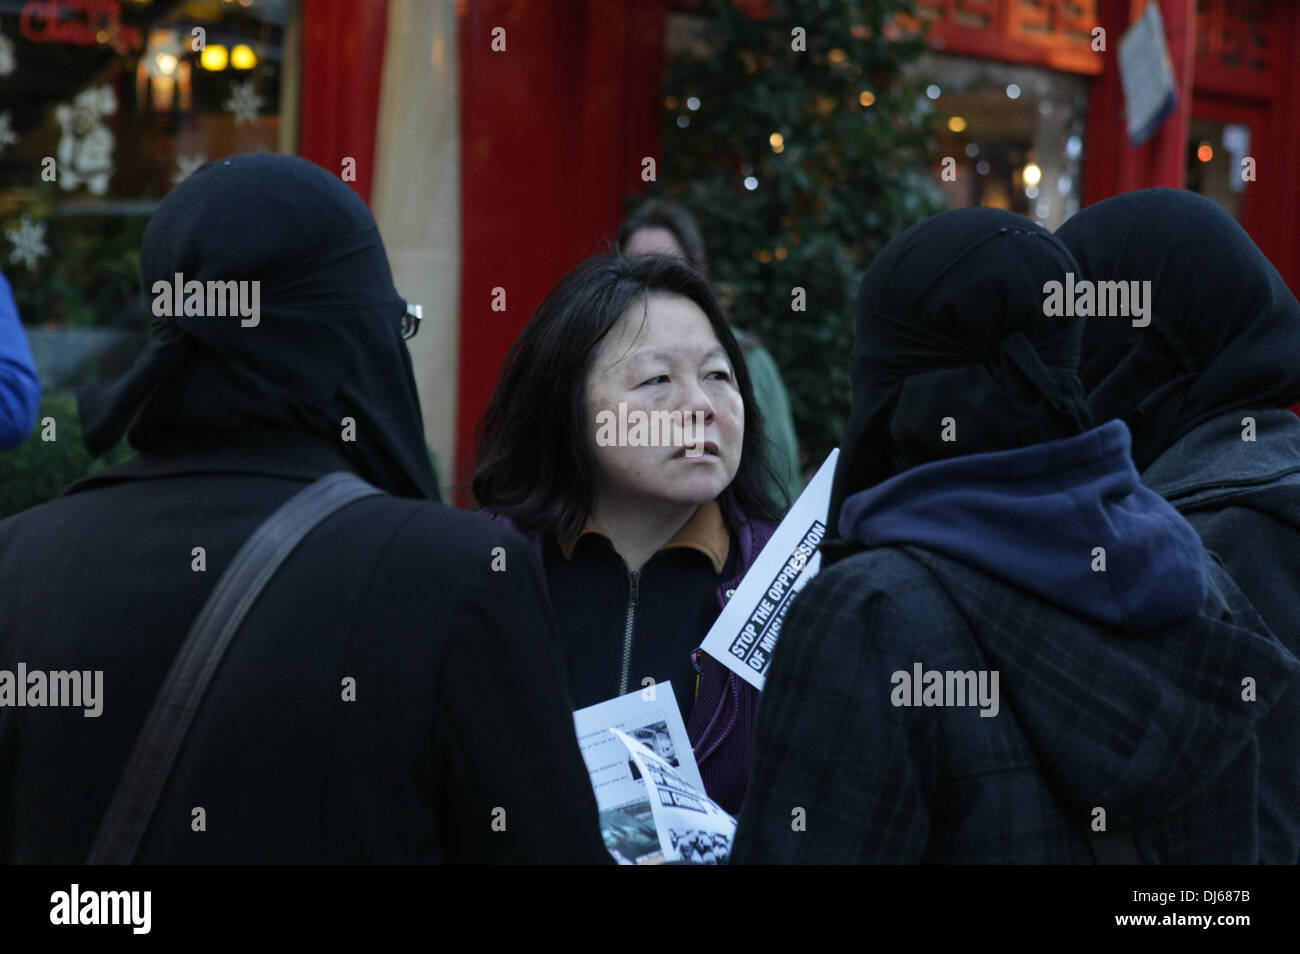 London, UK. 22nd November 2013. Burqua clad women at Anjem Choudary's Islamic Roadshow talk to local woman at protest to stop the Chinese oppression Against the Muslims of Xinjiang, Gerrard Street, London, UK, 22 November 2013 Credit:  martyn wheatley/Alamy Live News Stock Photo